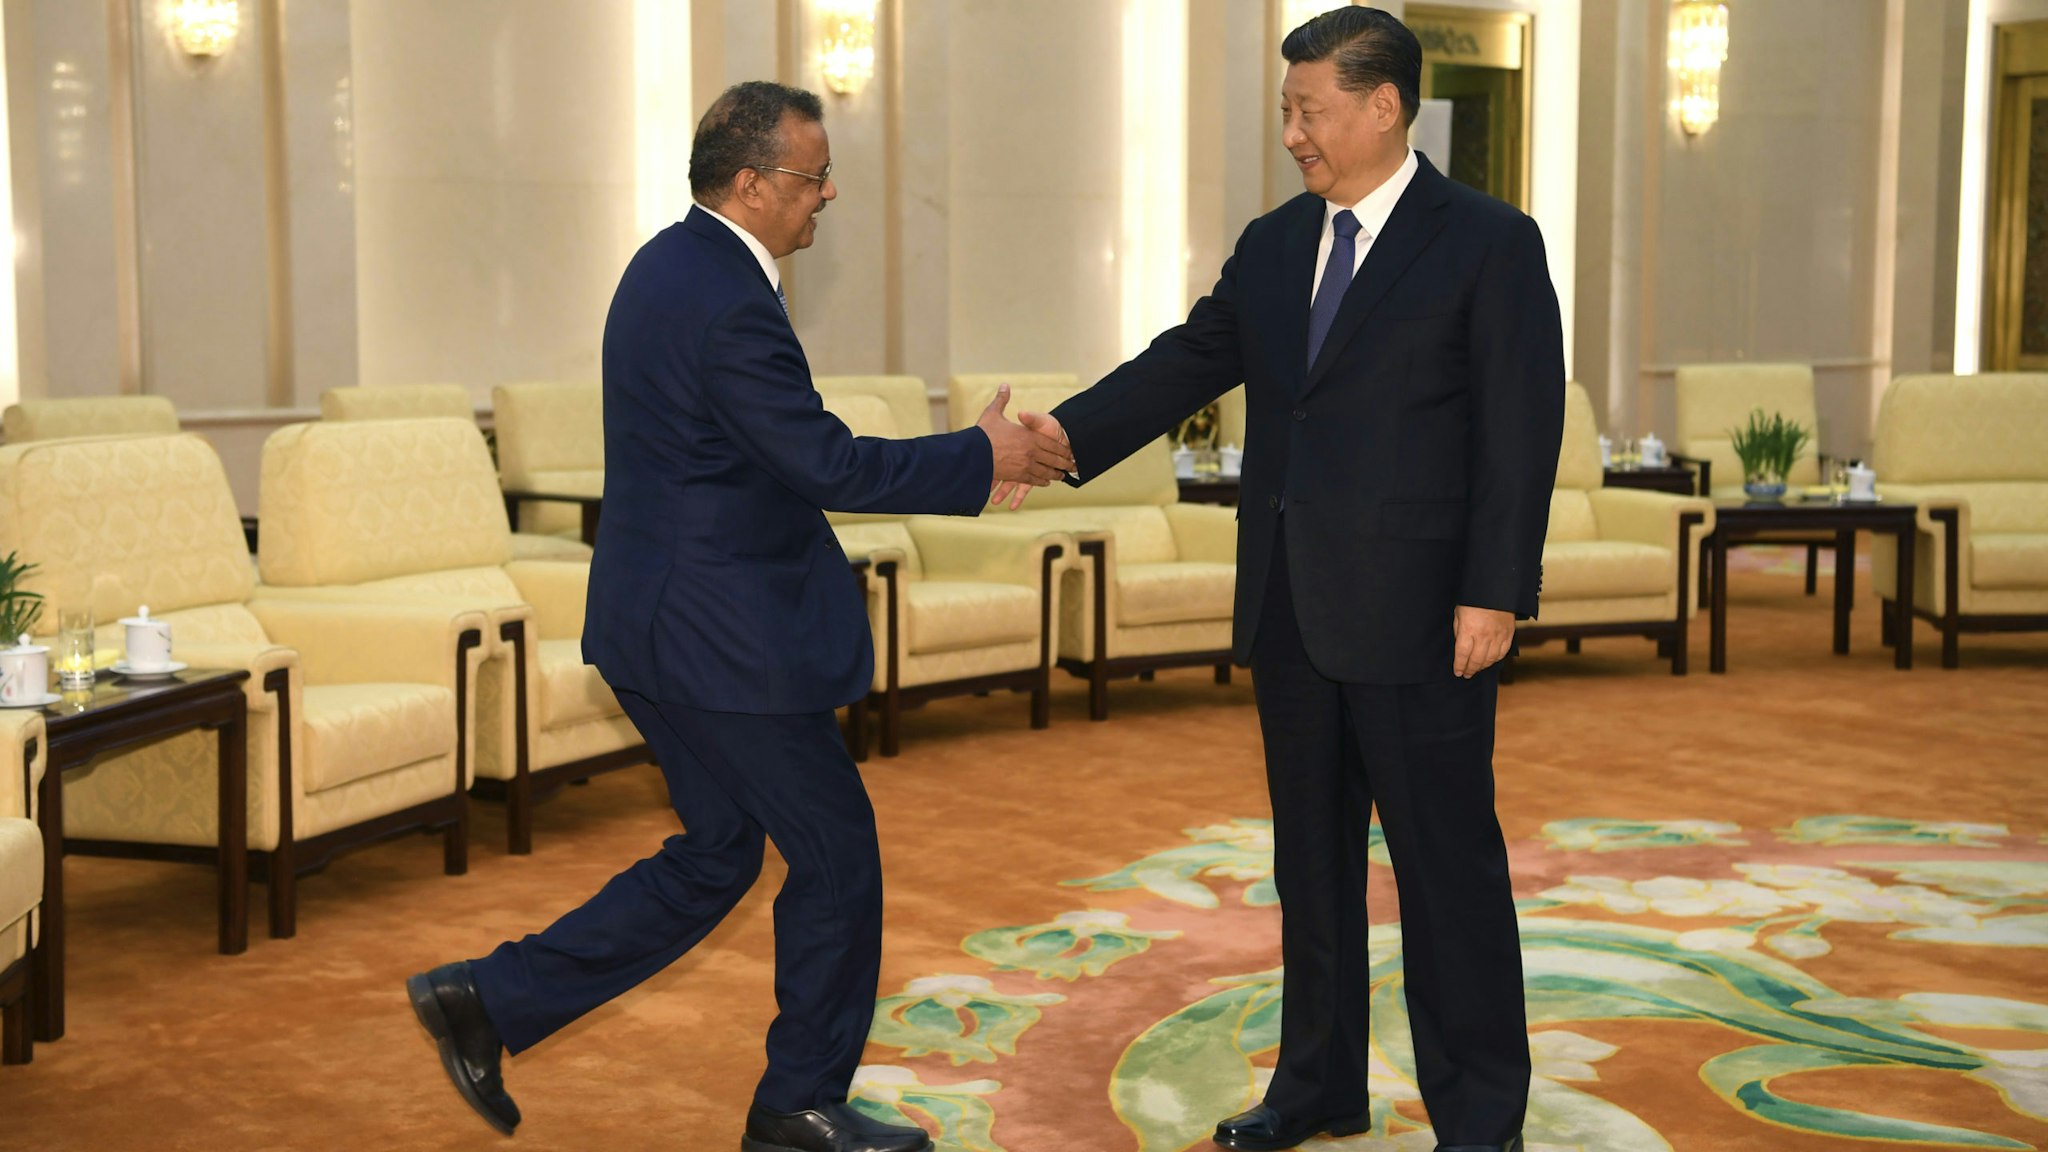 BEIJING, CHINA - JANUARY 28: Tedros Adhanom, Director General of the World Health Organization, (L) shakes hands with Chinese President Xi Jinping before a meeting at the Great Hall of the People, on January 28, 2020 in Beijing, China.